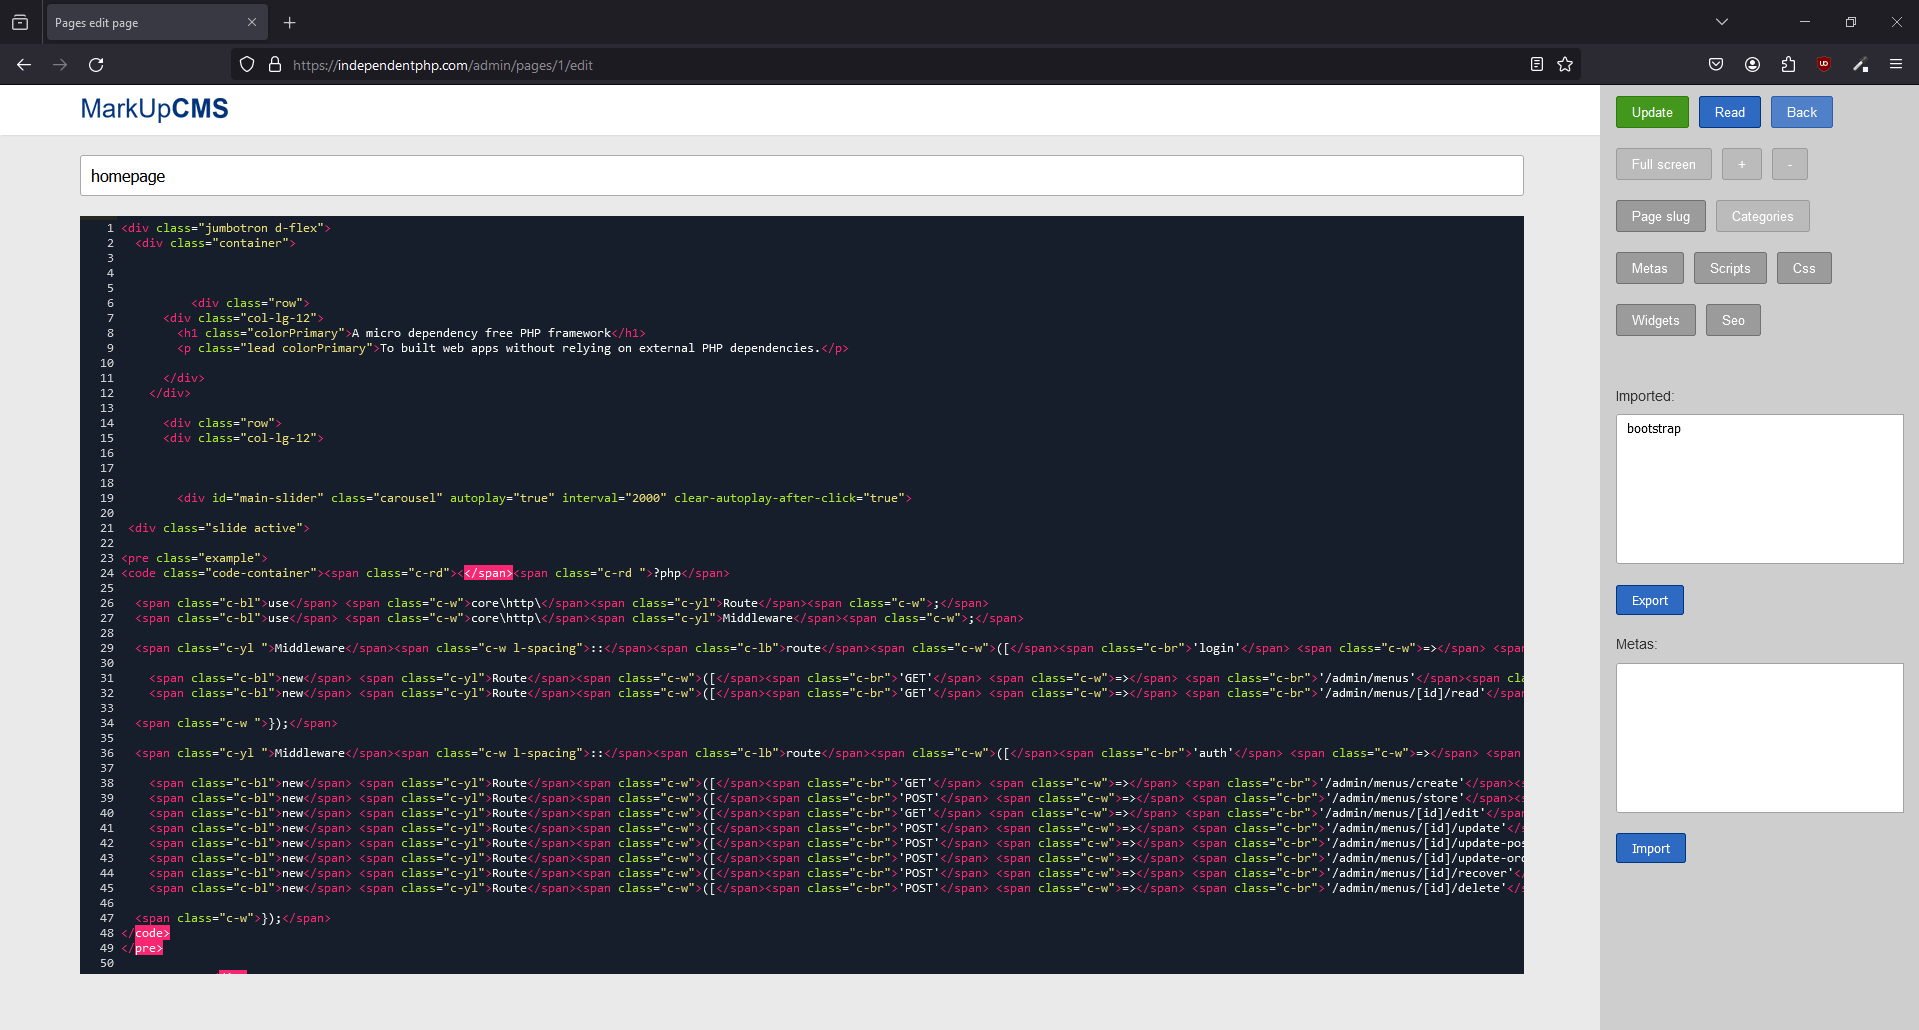 A screenshot of the pages edit page where the metas section is opened in MarkUpCMS